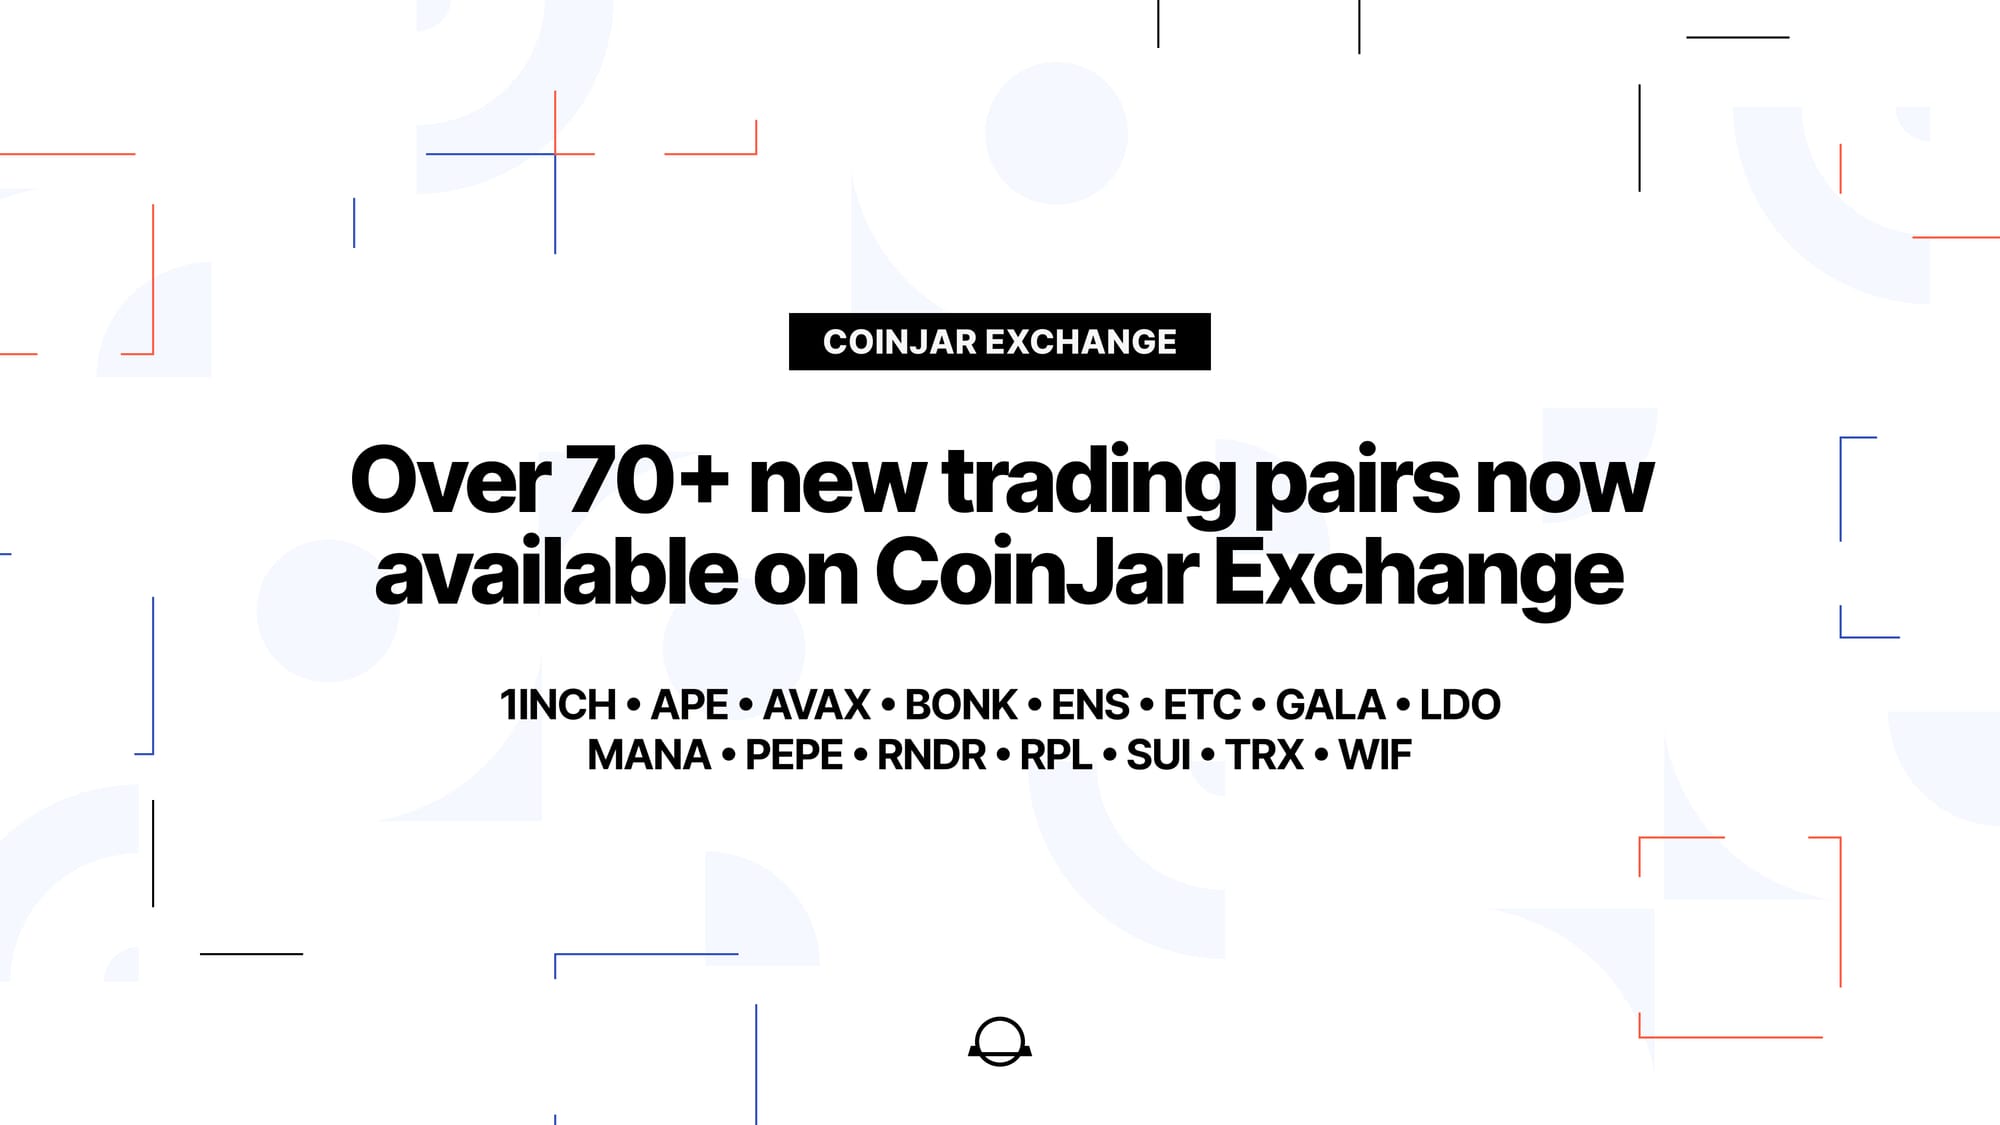 New trading pairs added to CoinJar Exchange